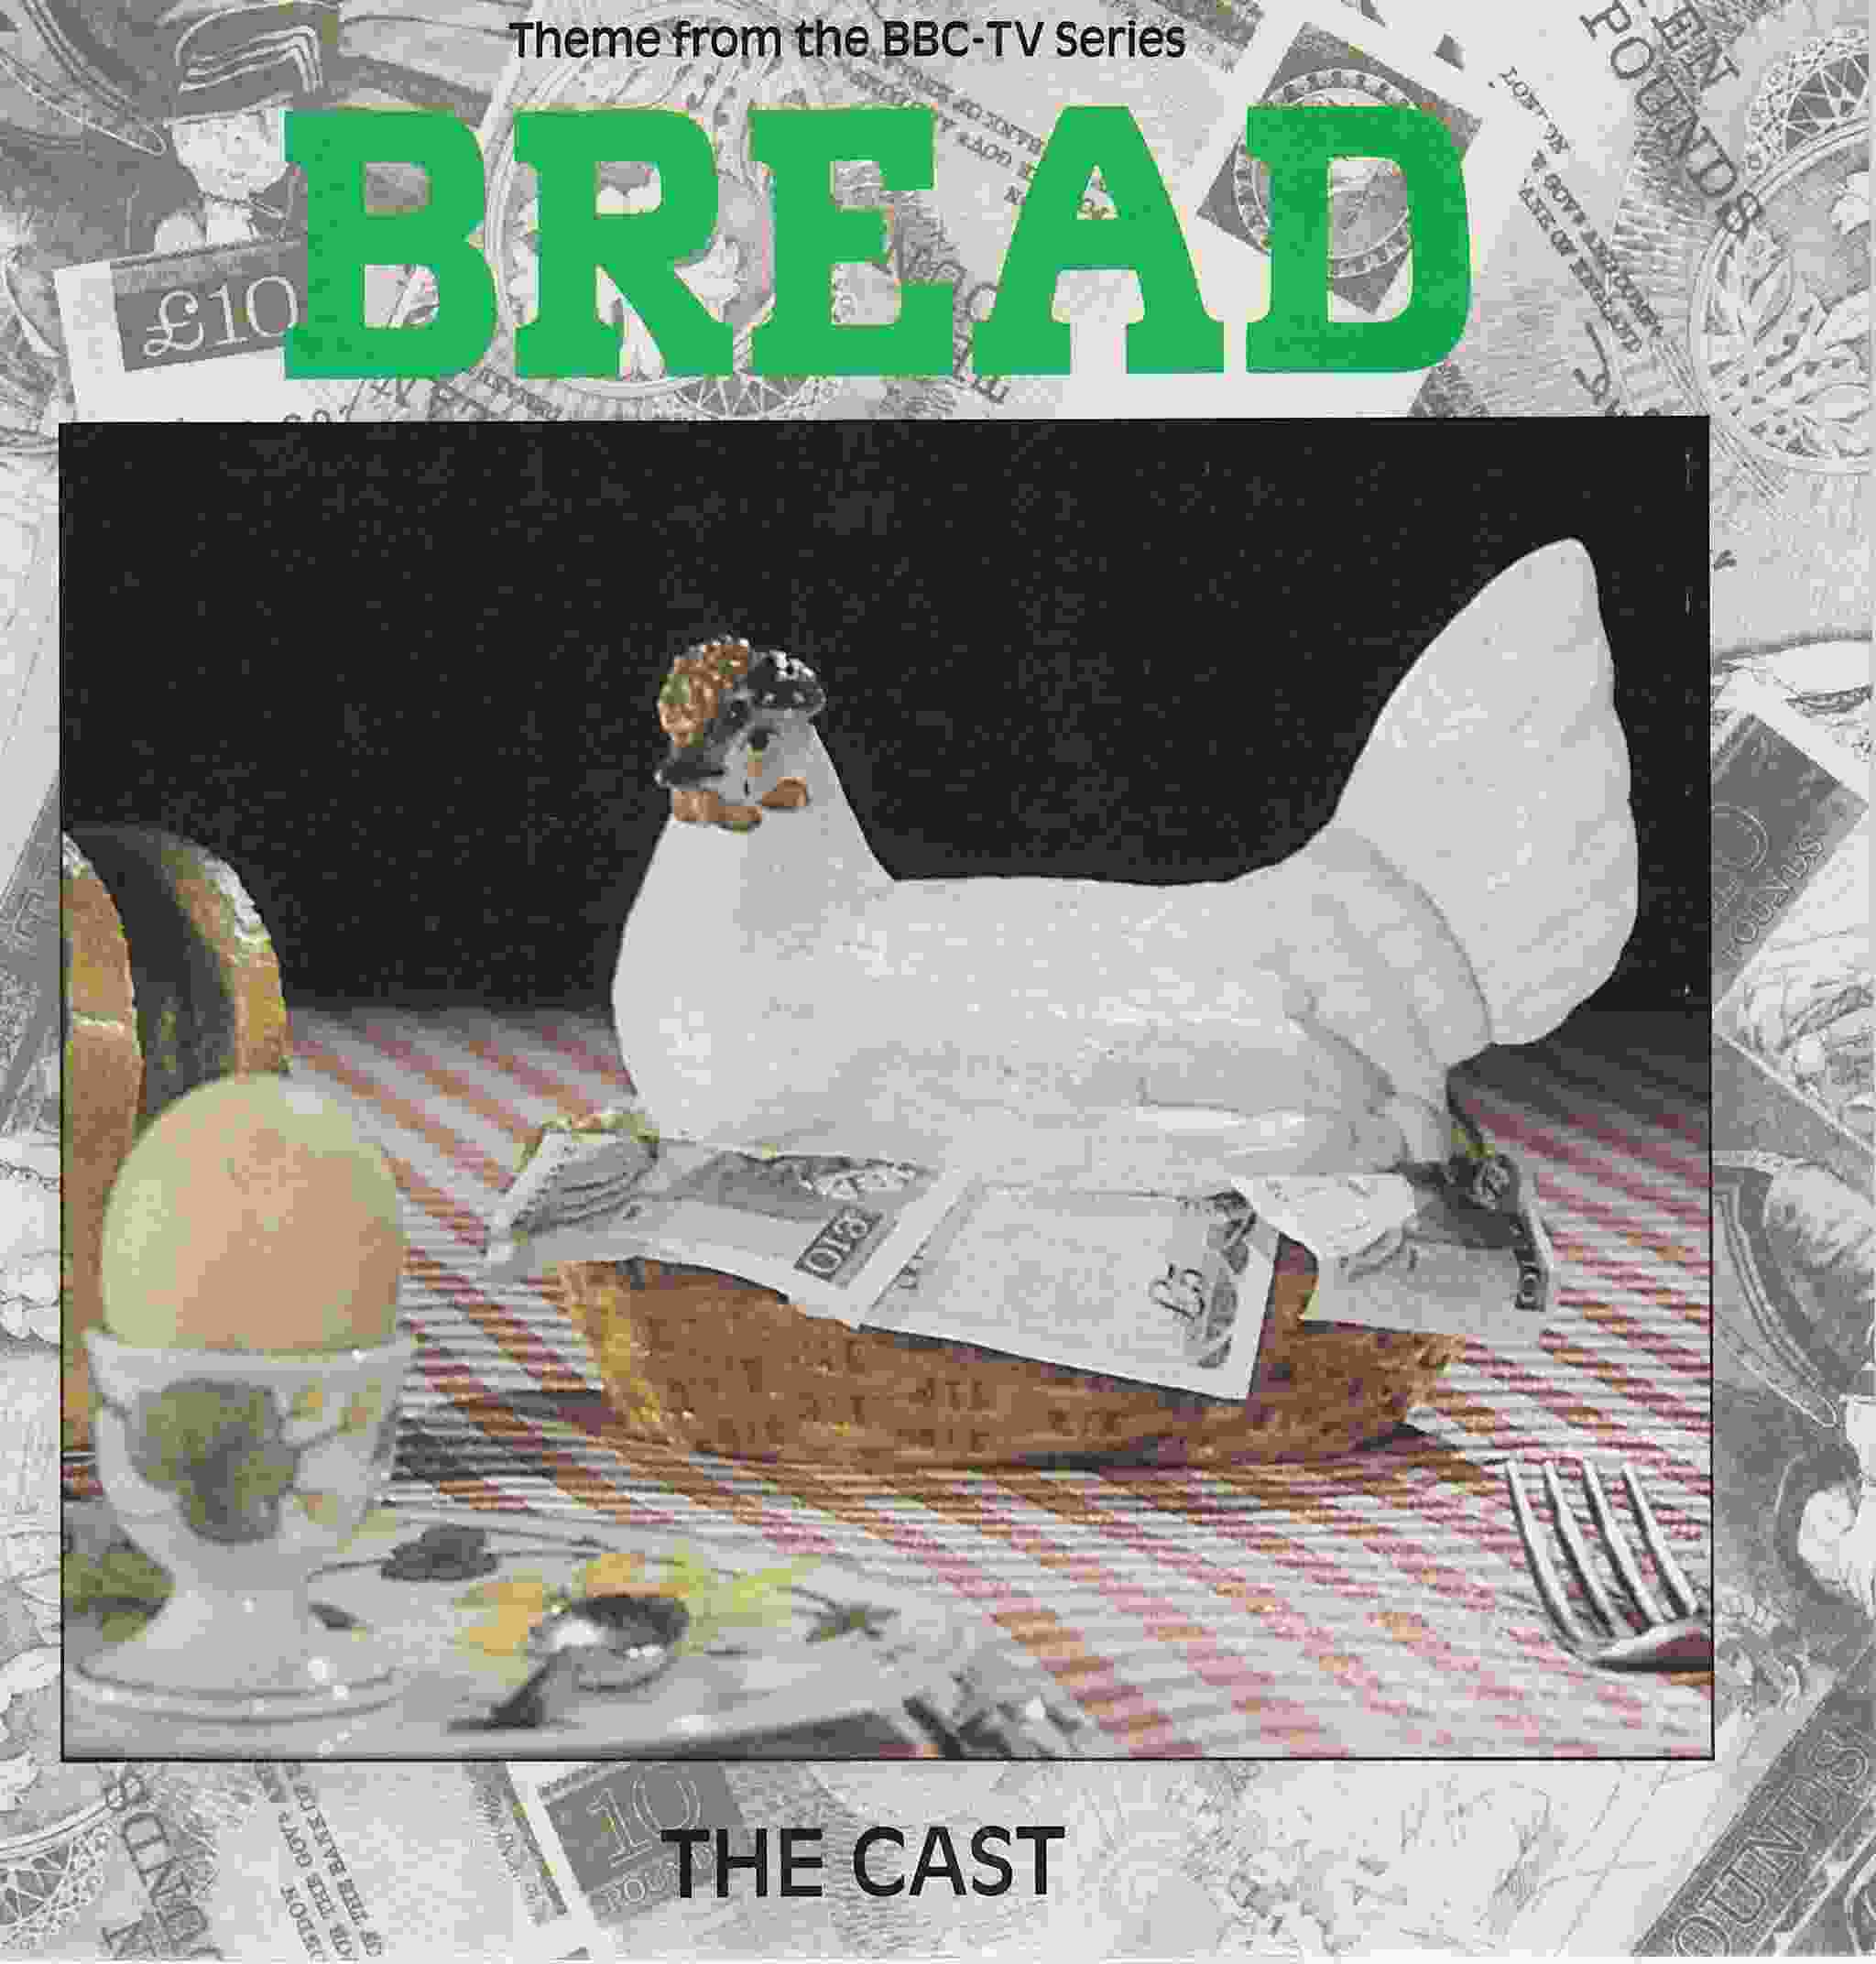 Picture of RESL 186 Home (Bread) by artist Carla Lane / David Mackay / The Cast / Nick Conway from the BBC singles - Records and Tapes library